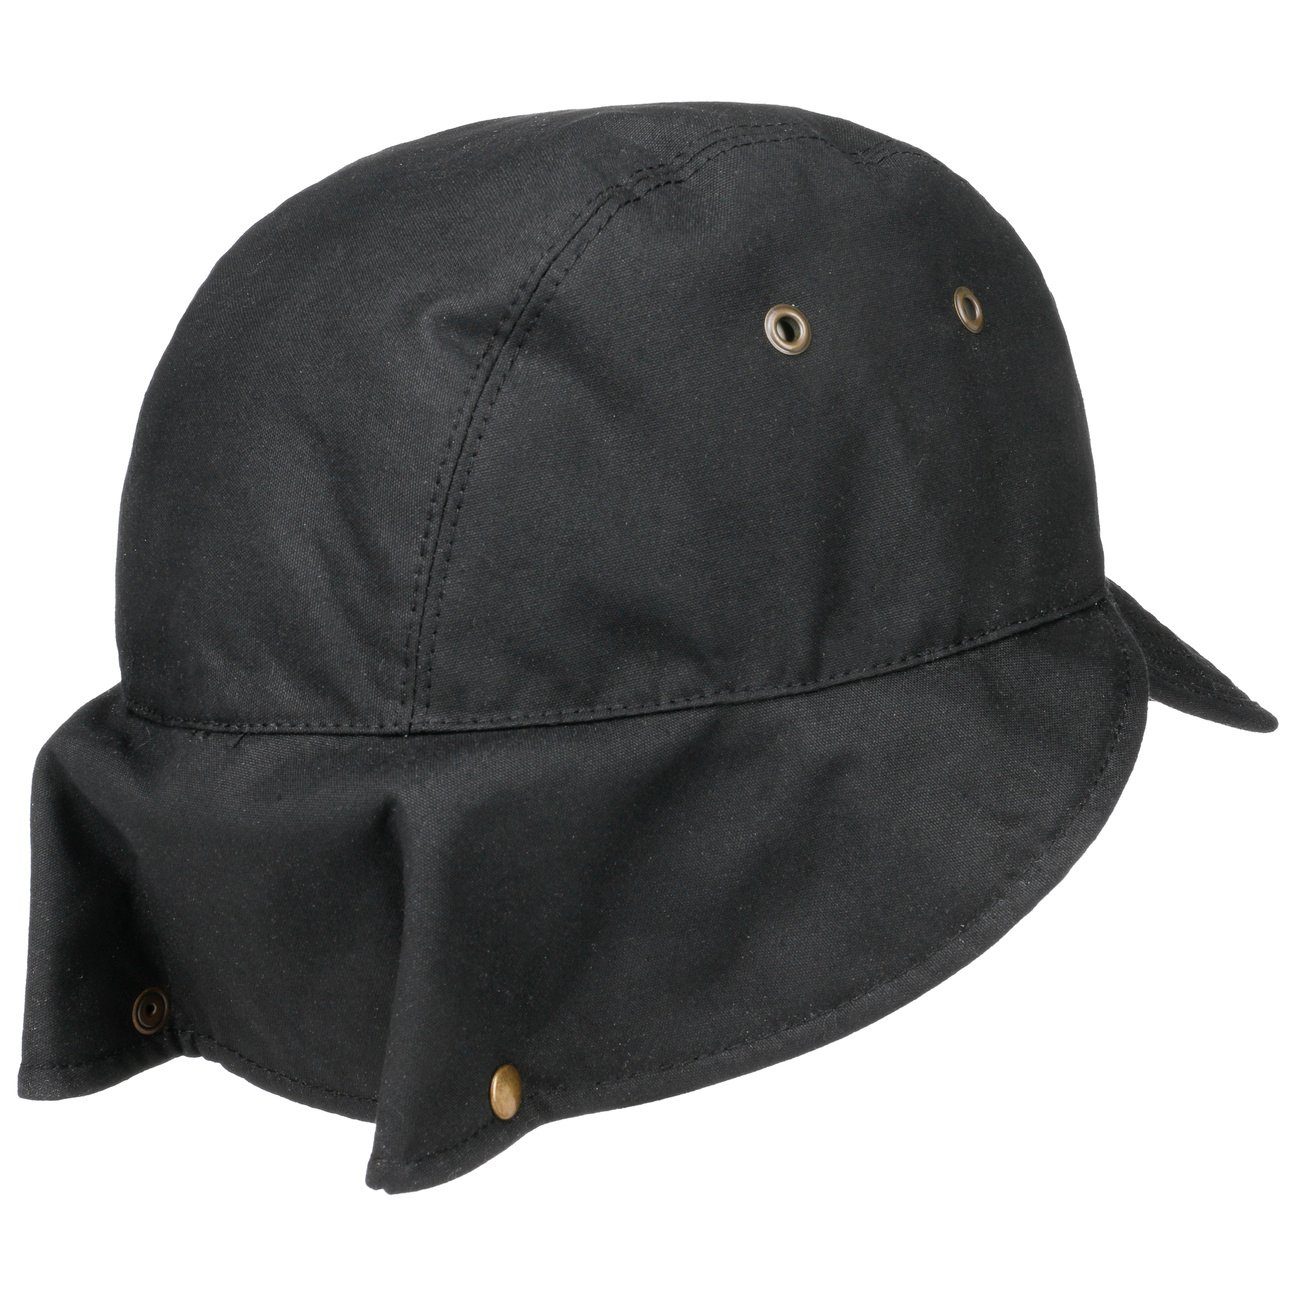 Italy (1-St) Schirm, in Cap Made Lierys Basecap mit Baseball